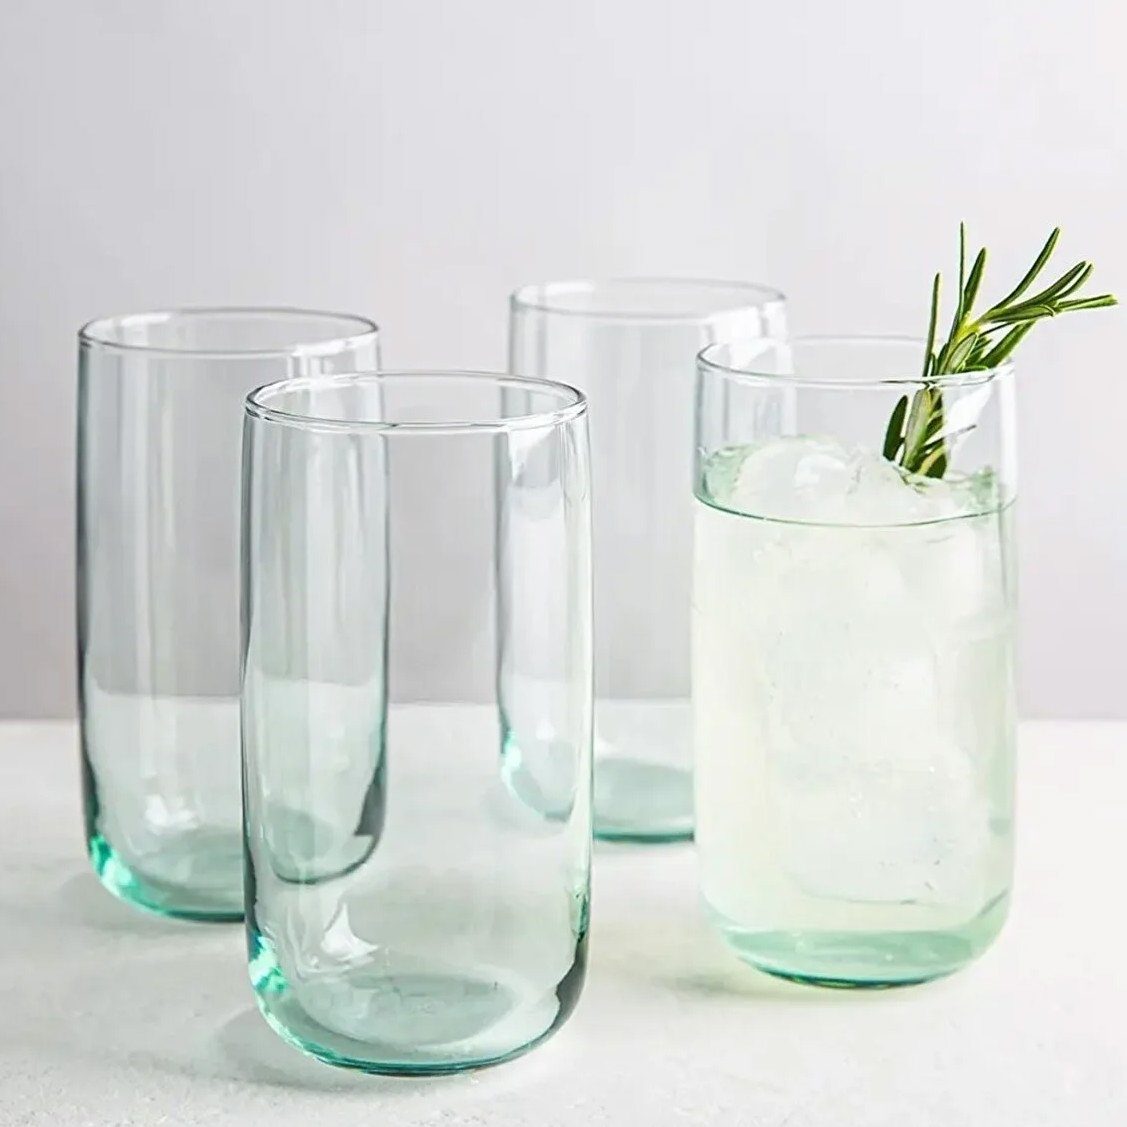 Pasabahce Longdrinkglas 4-Teilig Iconic Стаканы для воды recycletes Ikonisches Glas 365 cc